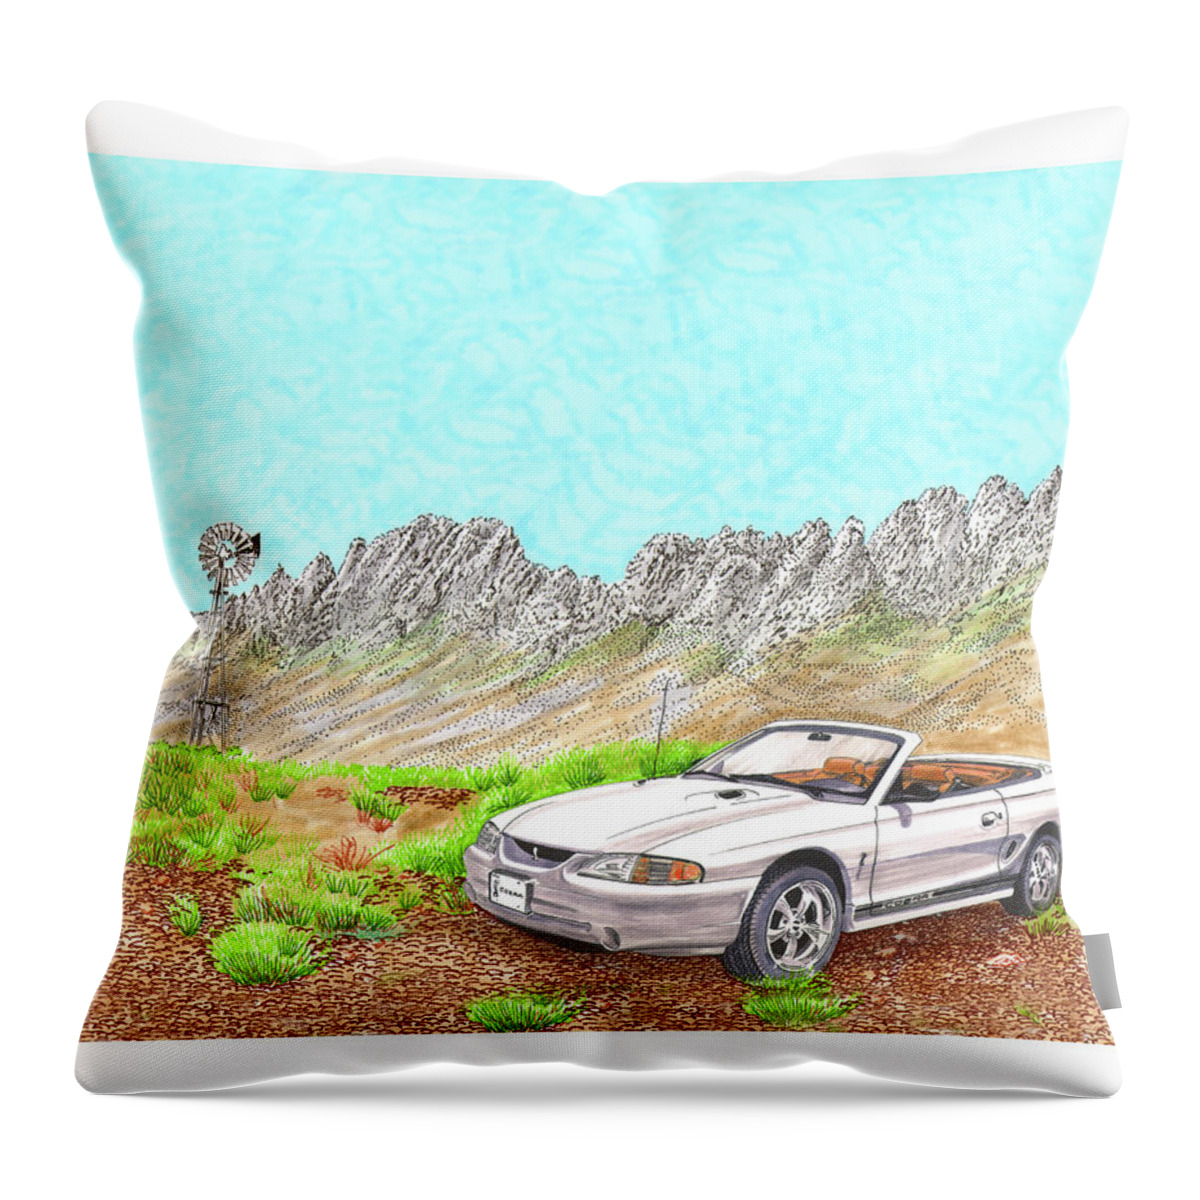 1997 Ford Svt Mustang Cobra Throw Pillow featuring the painting Organ Mountain Mustang by Jack Pumphrey